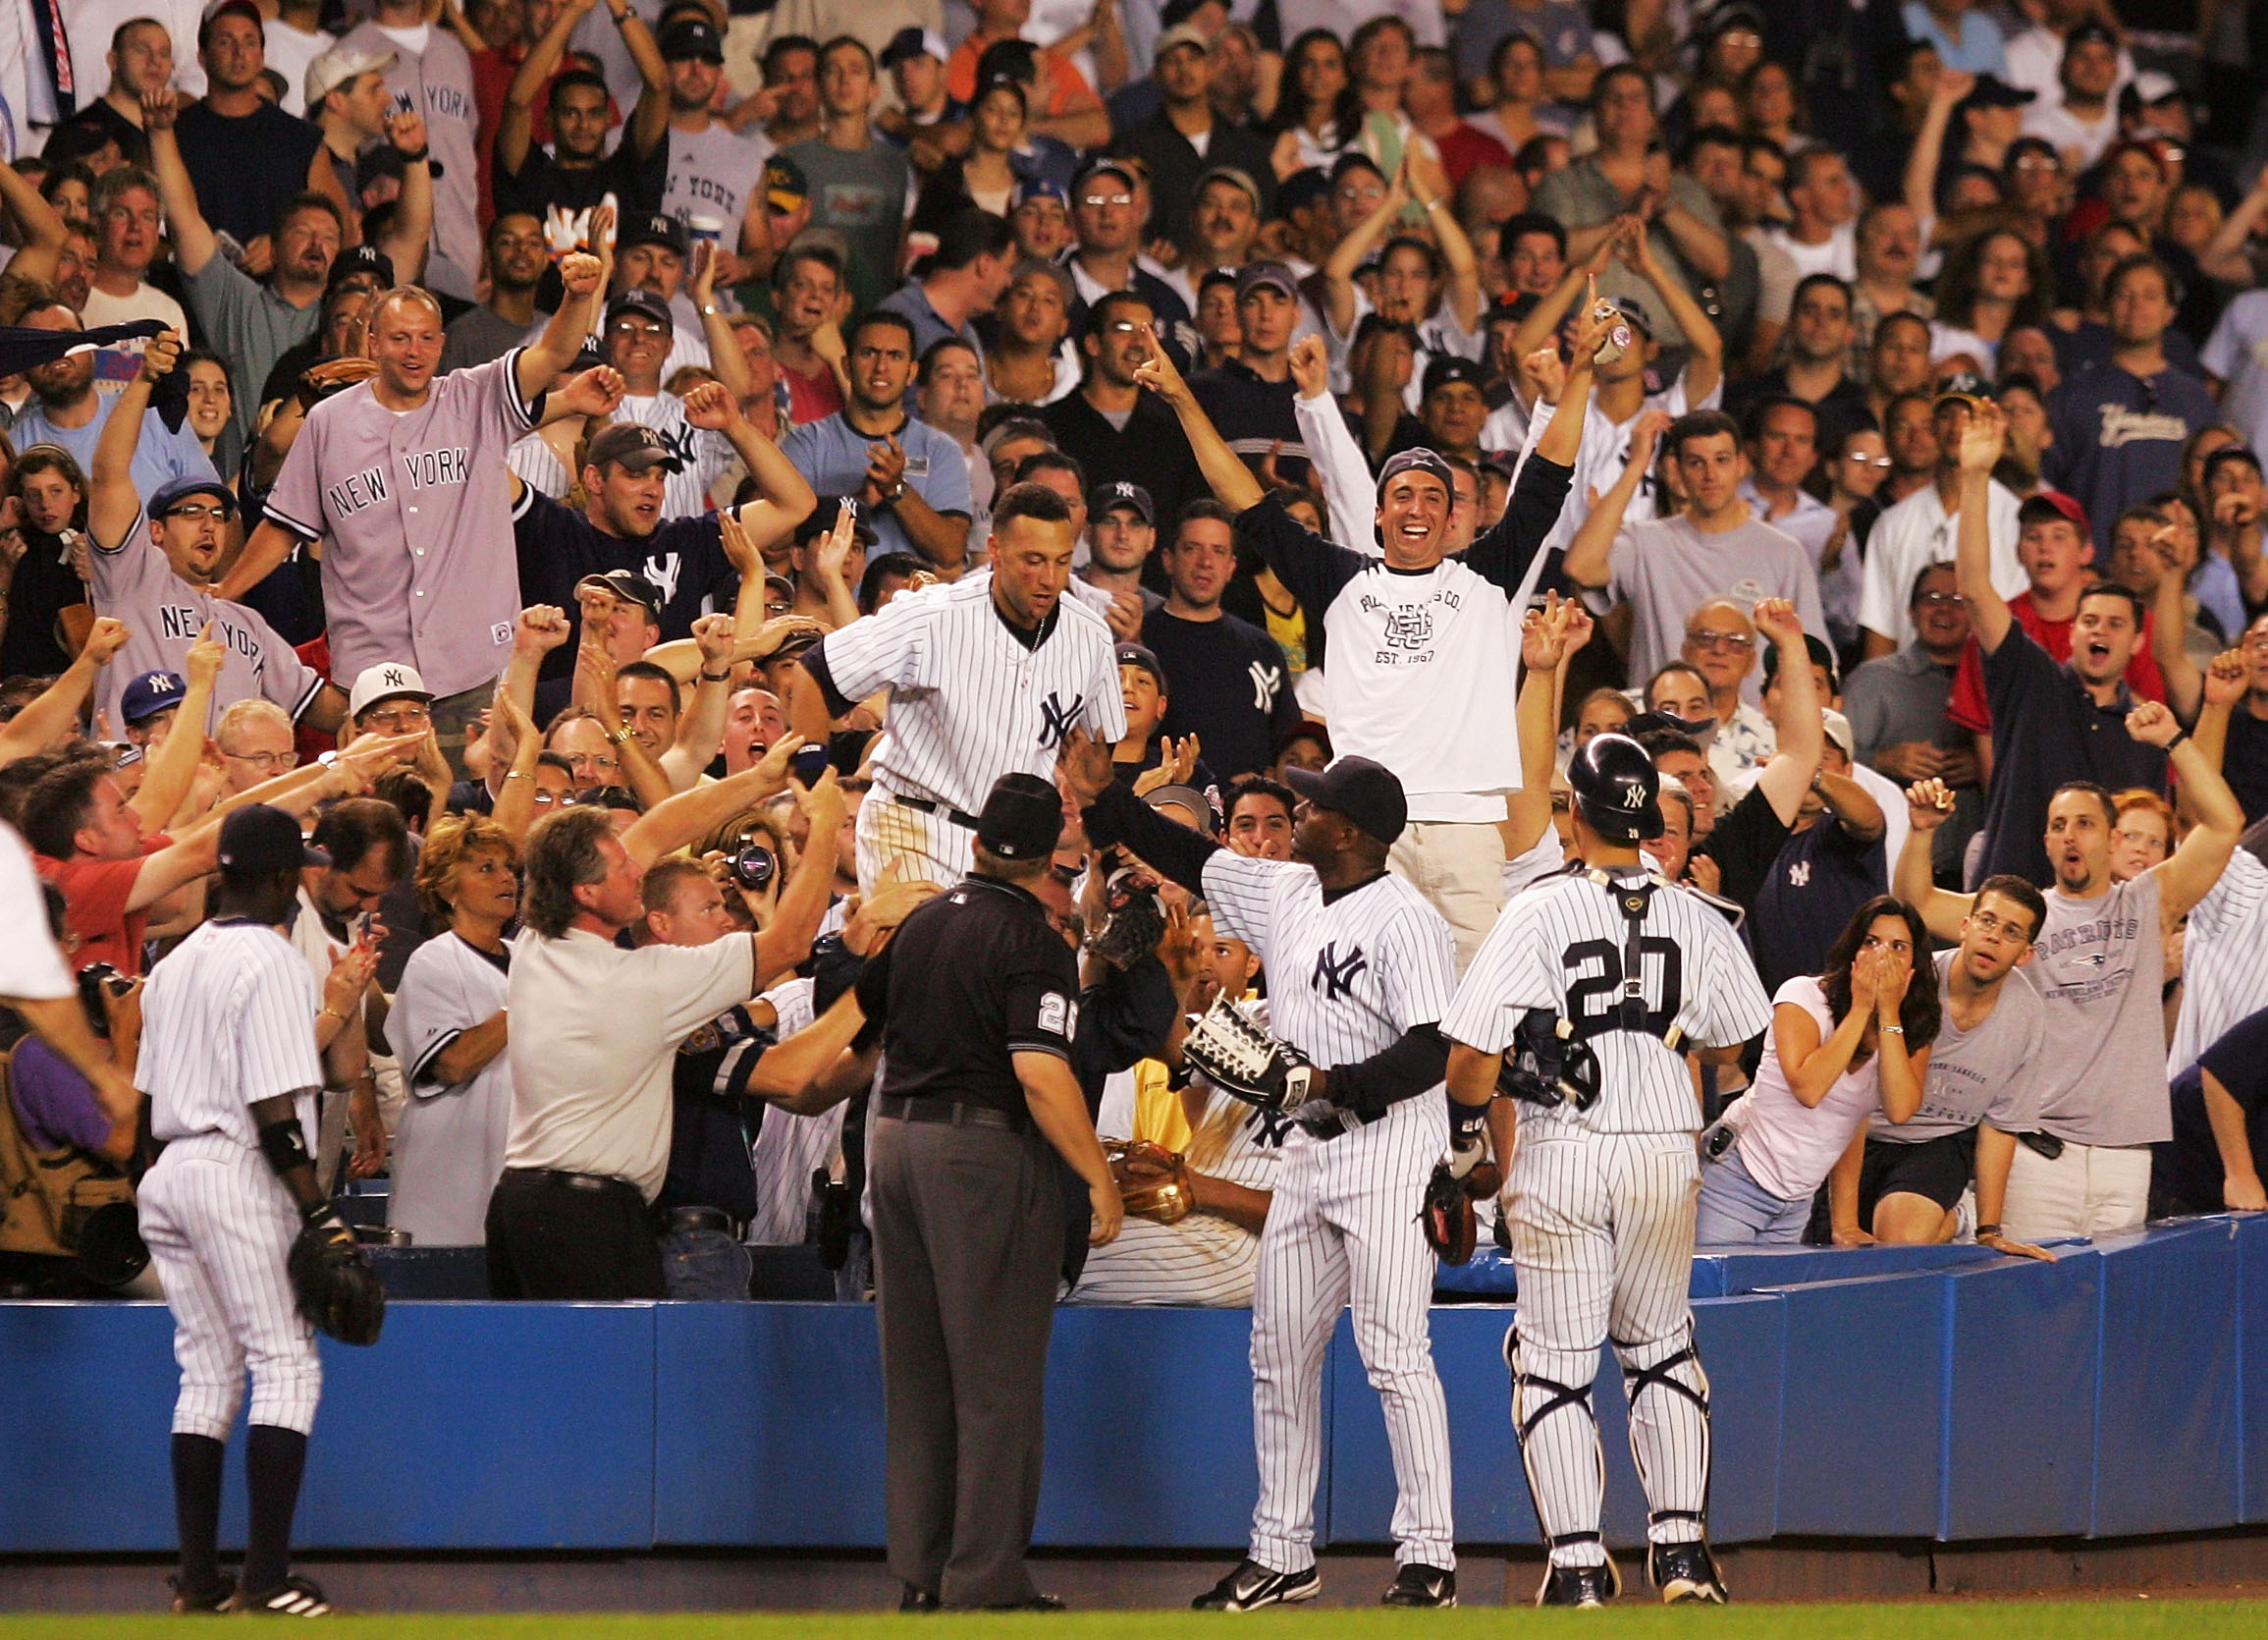 Derek Jeter is helped back on the field after making a diving catch into the crowd in the 12th inning against the Boston Red Sox on July 1, 2004 at Yankee Stadium. The Yankees won 5-4 in 13 innings.  (Photo by Ezra Shaw/Getty Images)